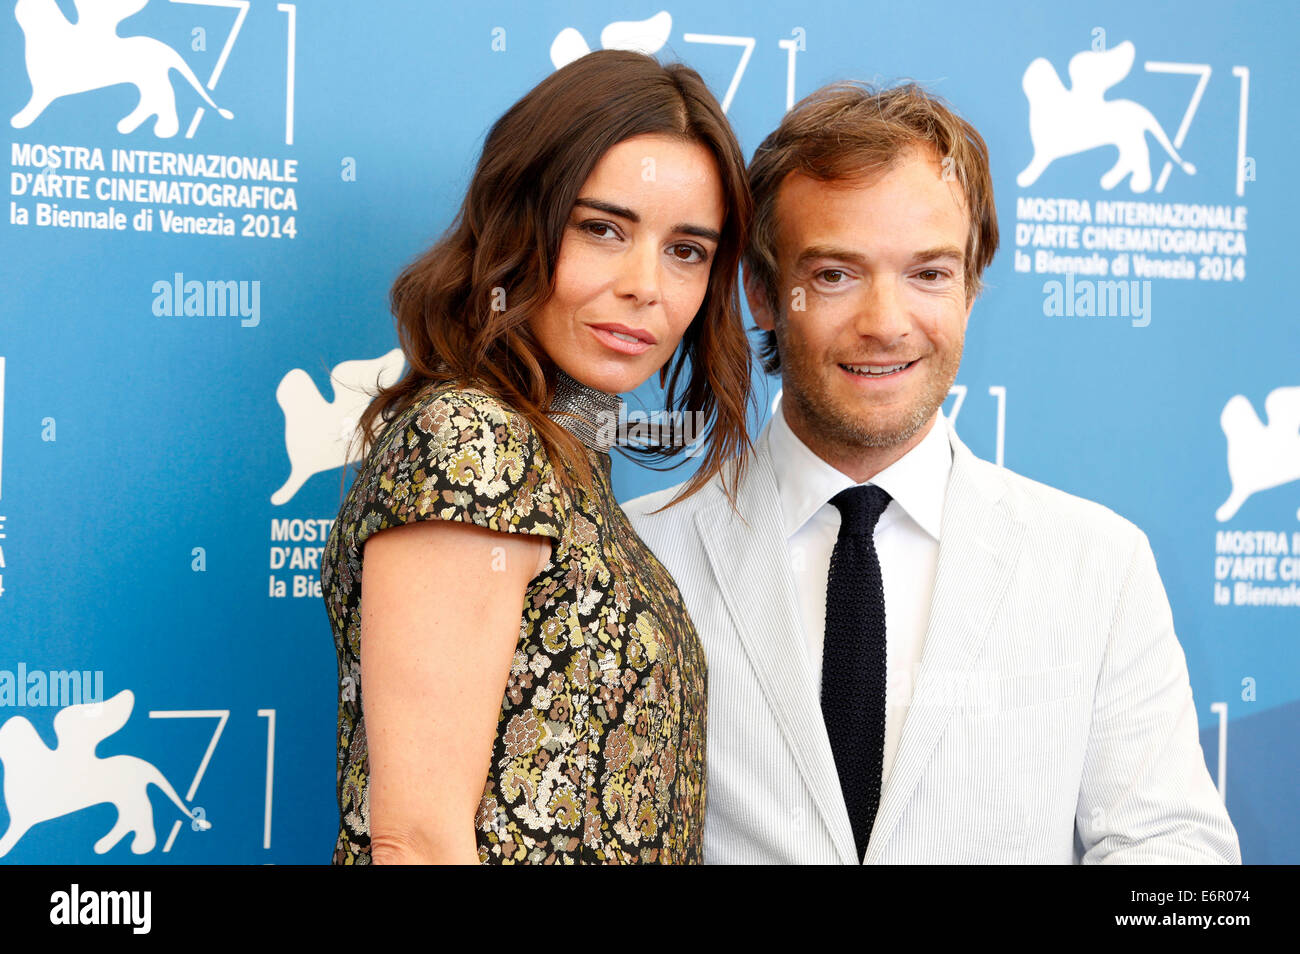 Elodie Bouchez and Jonathan Lambert during the 'Reality' photocall at the 71nd Venice International Film Festival on August 28, 2014./picture alliance Stock Photo